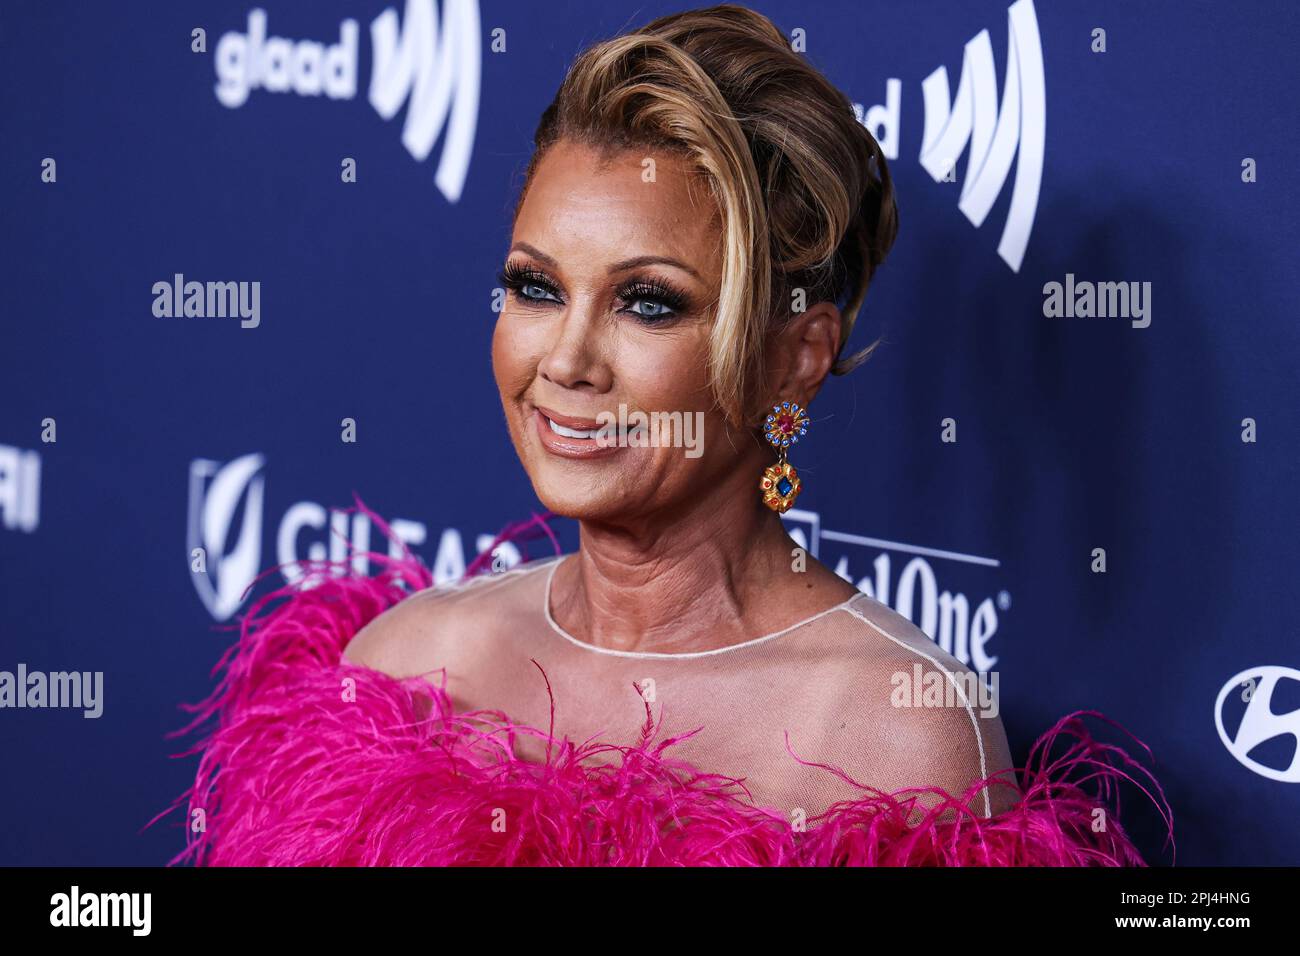 Beverly Hills, United States. 30th Mar, 2023. BEVERLY HILLS, LOS ANGELES, CALIFORNIA, USA - MARCH 30: American singer, actress and fashion designer Vanessa Williams arrives at the 34th Annual GLAAD Media Awards Los Angeles held at The Beverly Hilton Hotel on March 30, 2023 in Beverly Hills, Los Angeles, California, United States. (Photo by Xavier Collin/Image Press Agency) Credit: Image Press Agency/Alamy Live News Stock Photo